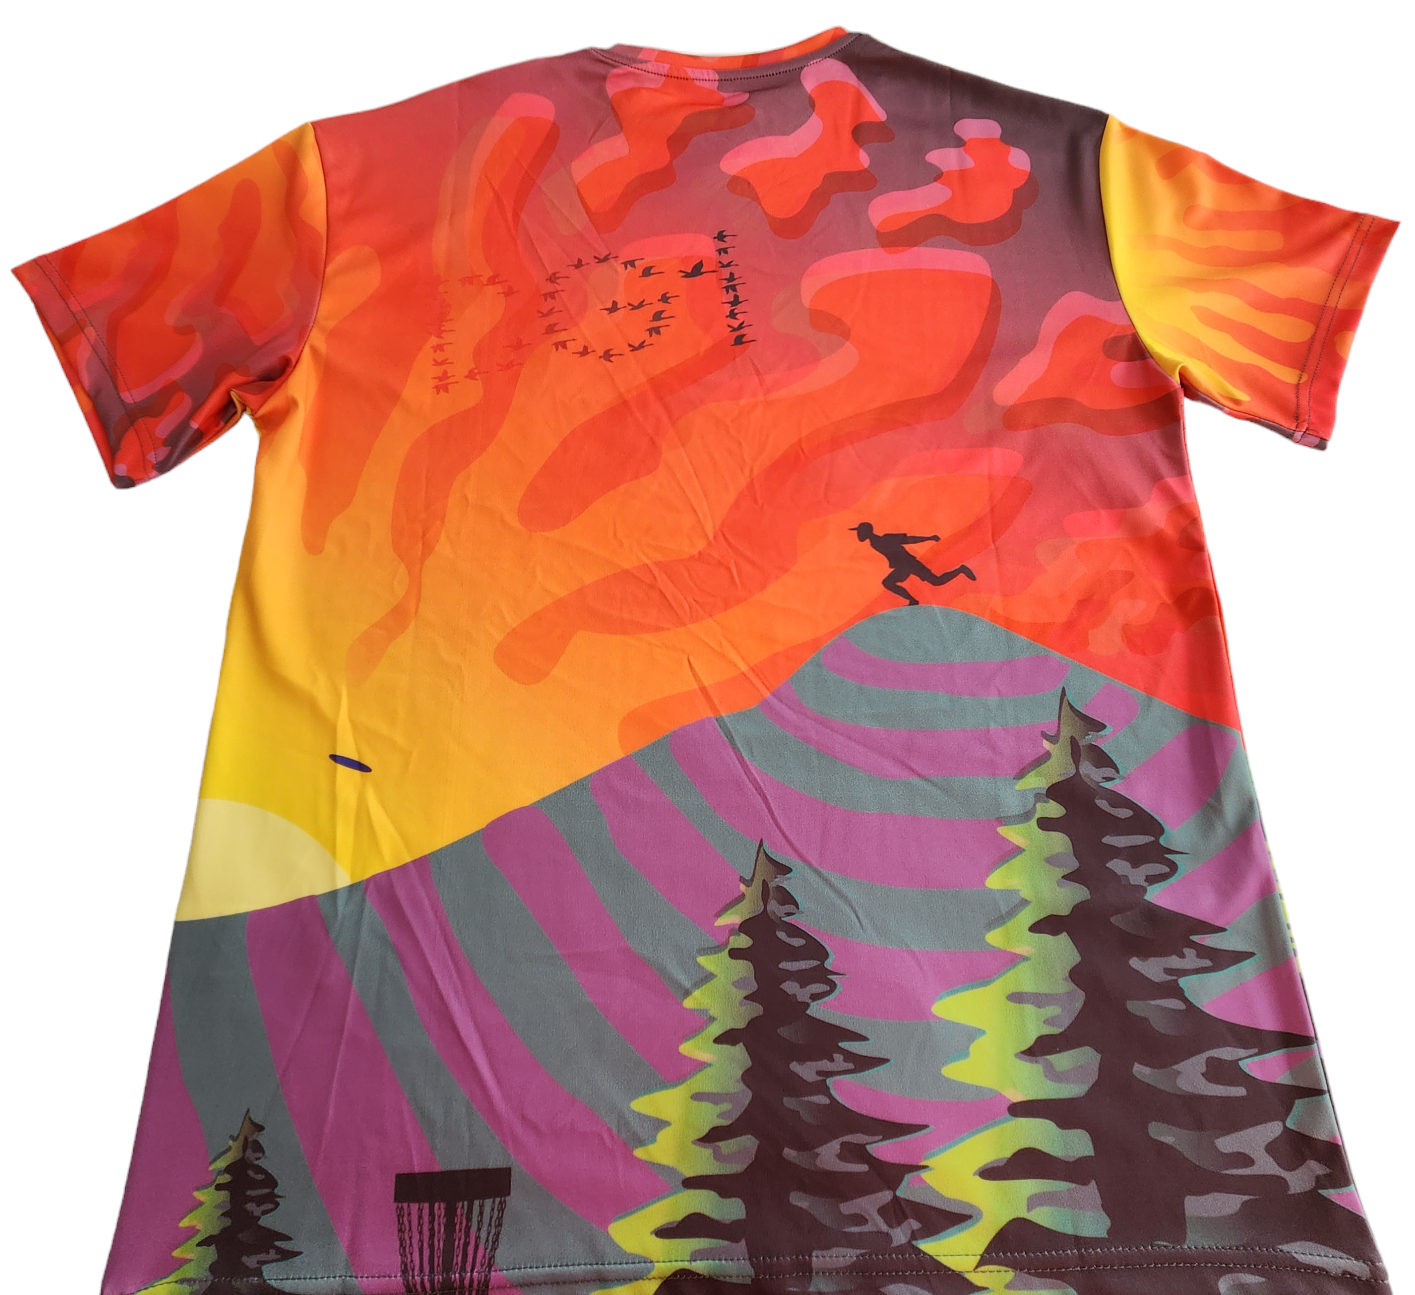 Disc Golf Performance Short Sleeve Shirts Great for Outdoor Sports Enthusiasts